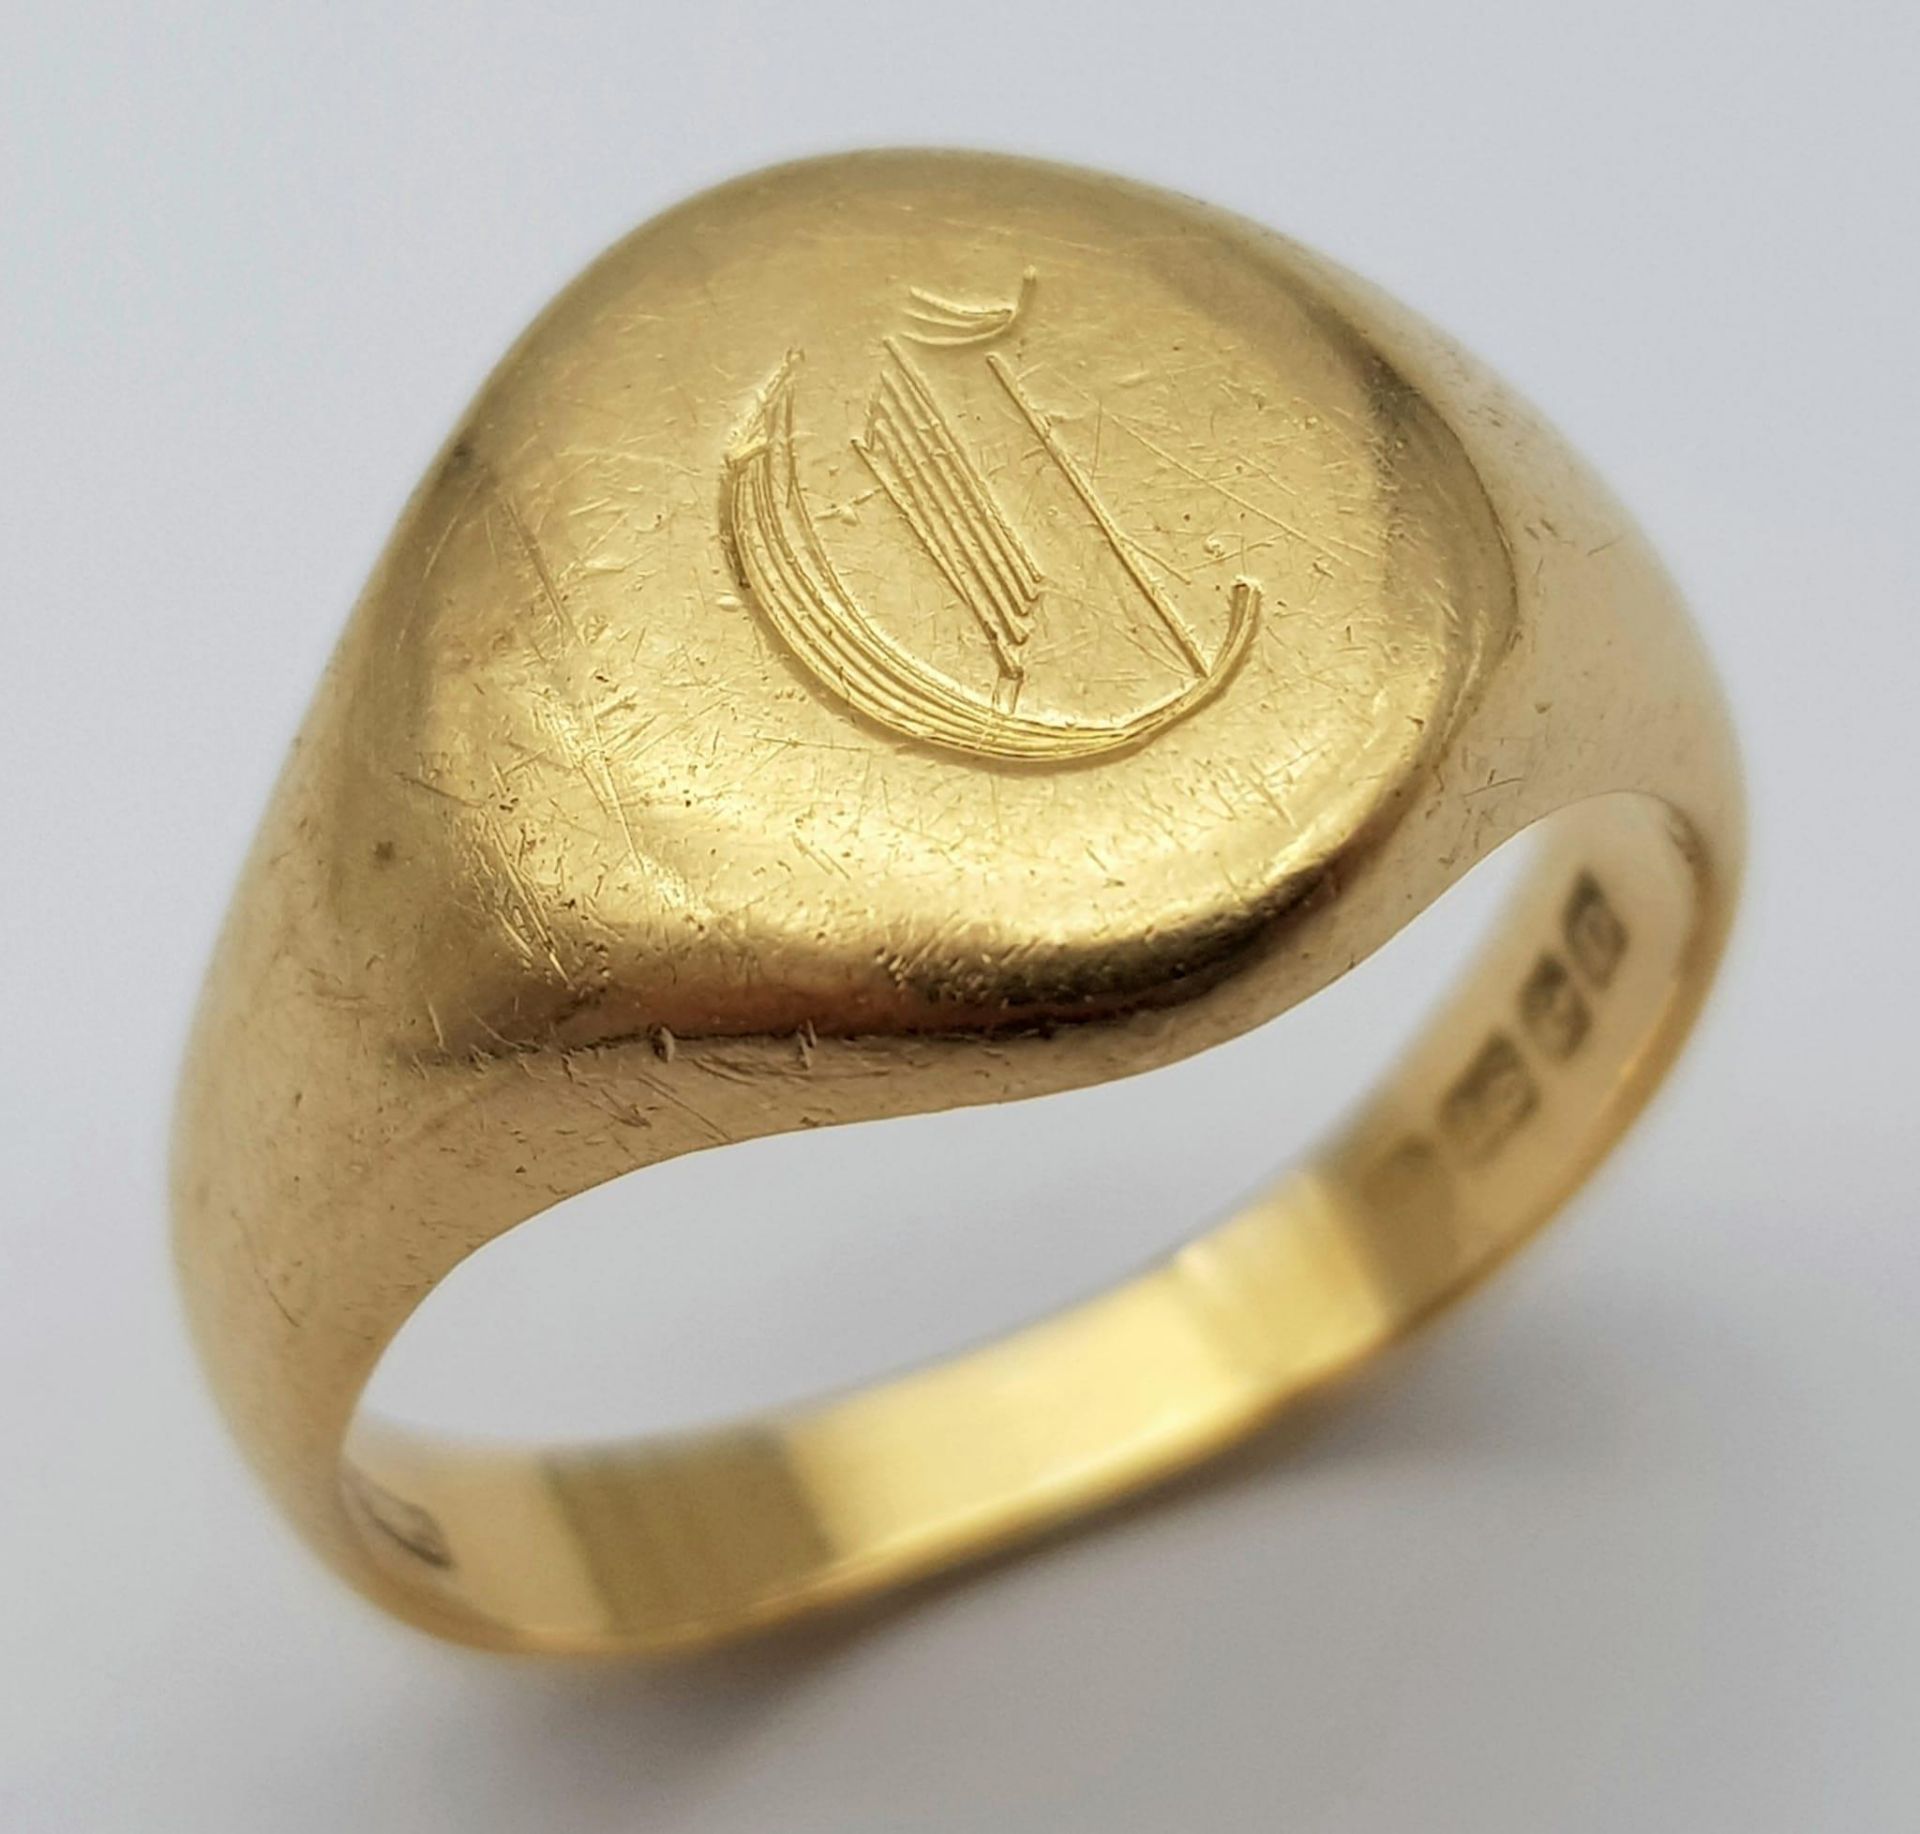 A Vintage 18K Yellow Gold Gents Signet Ring. Size X. 12.2g weight.